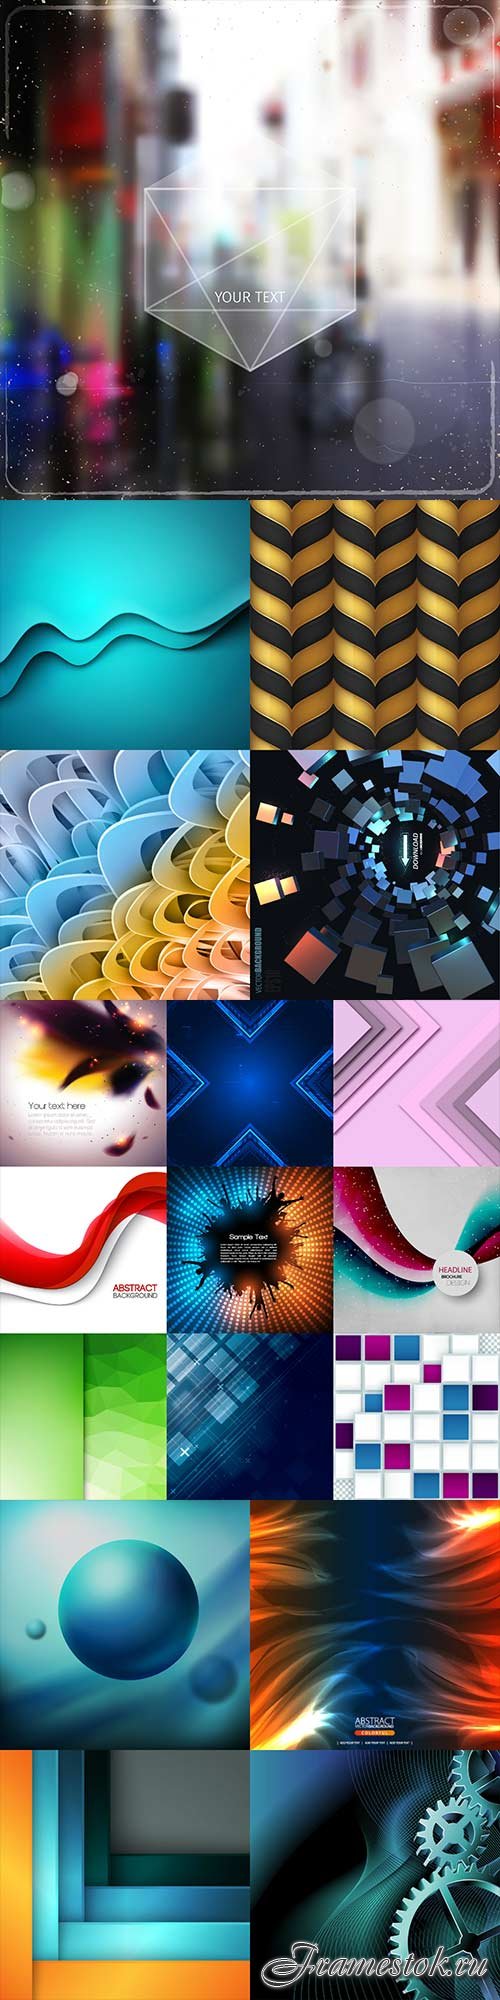 Bright colorful abstract backgrounds vector - 77